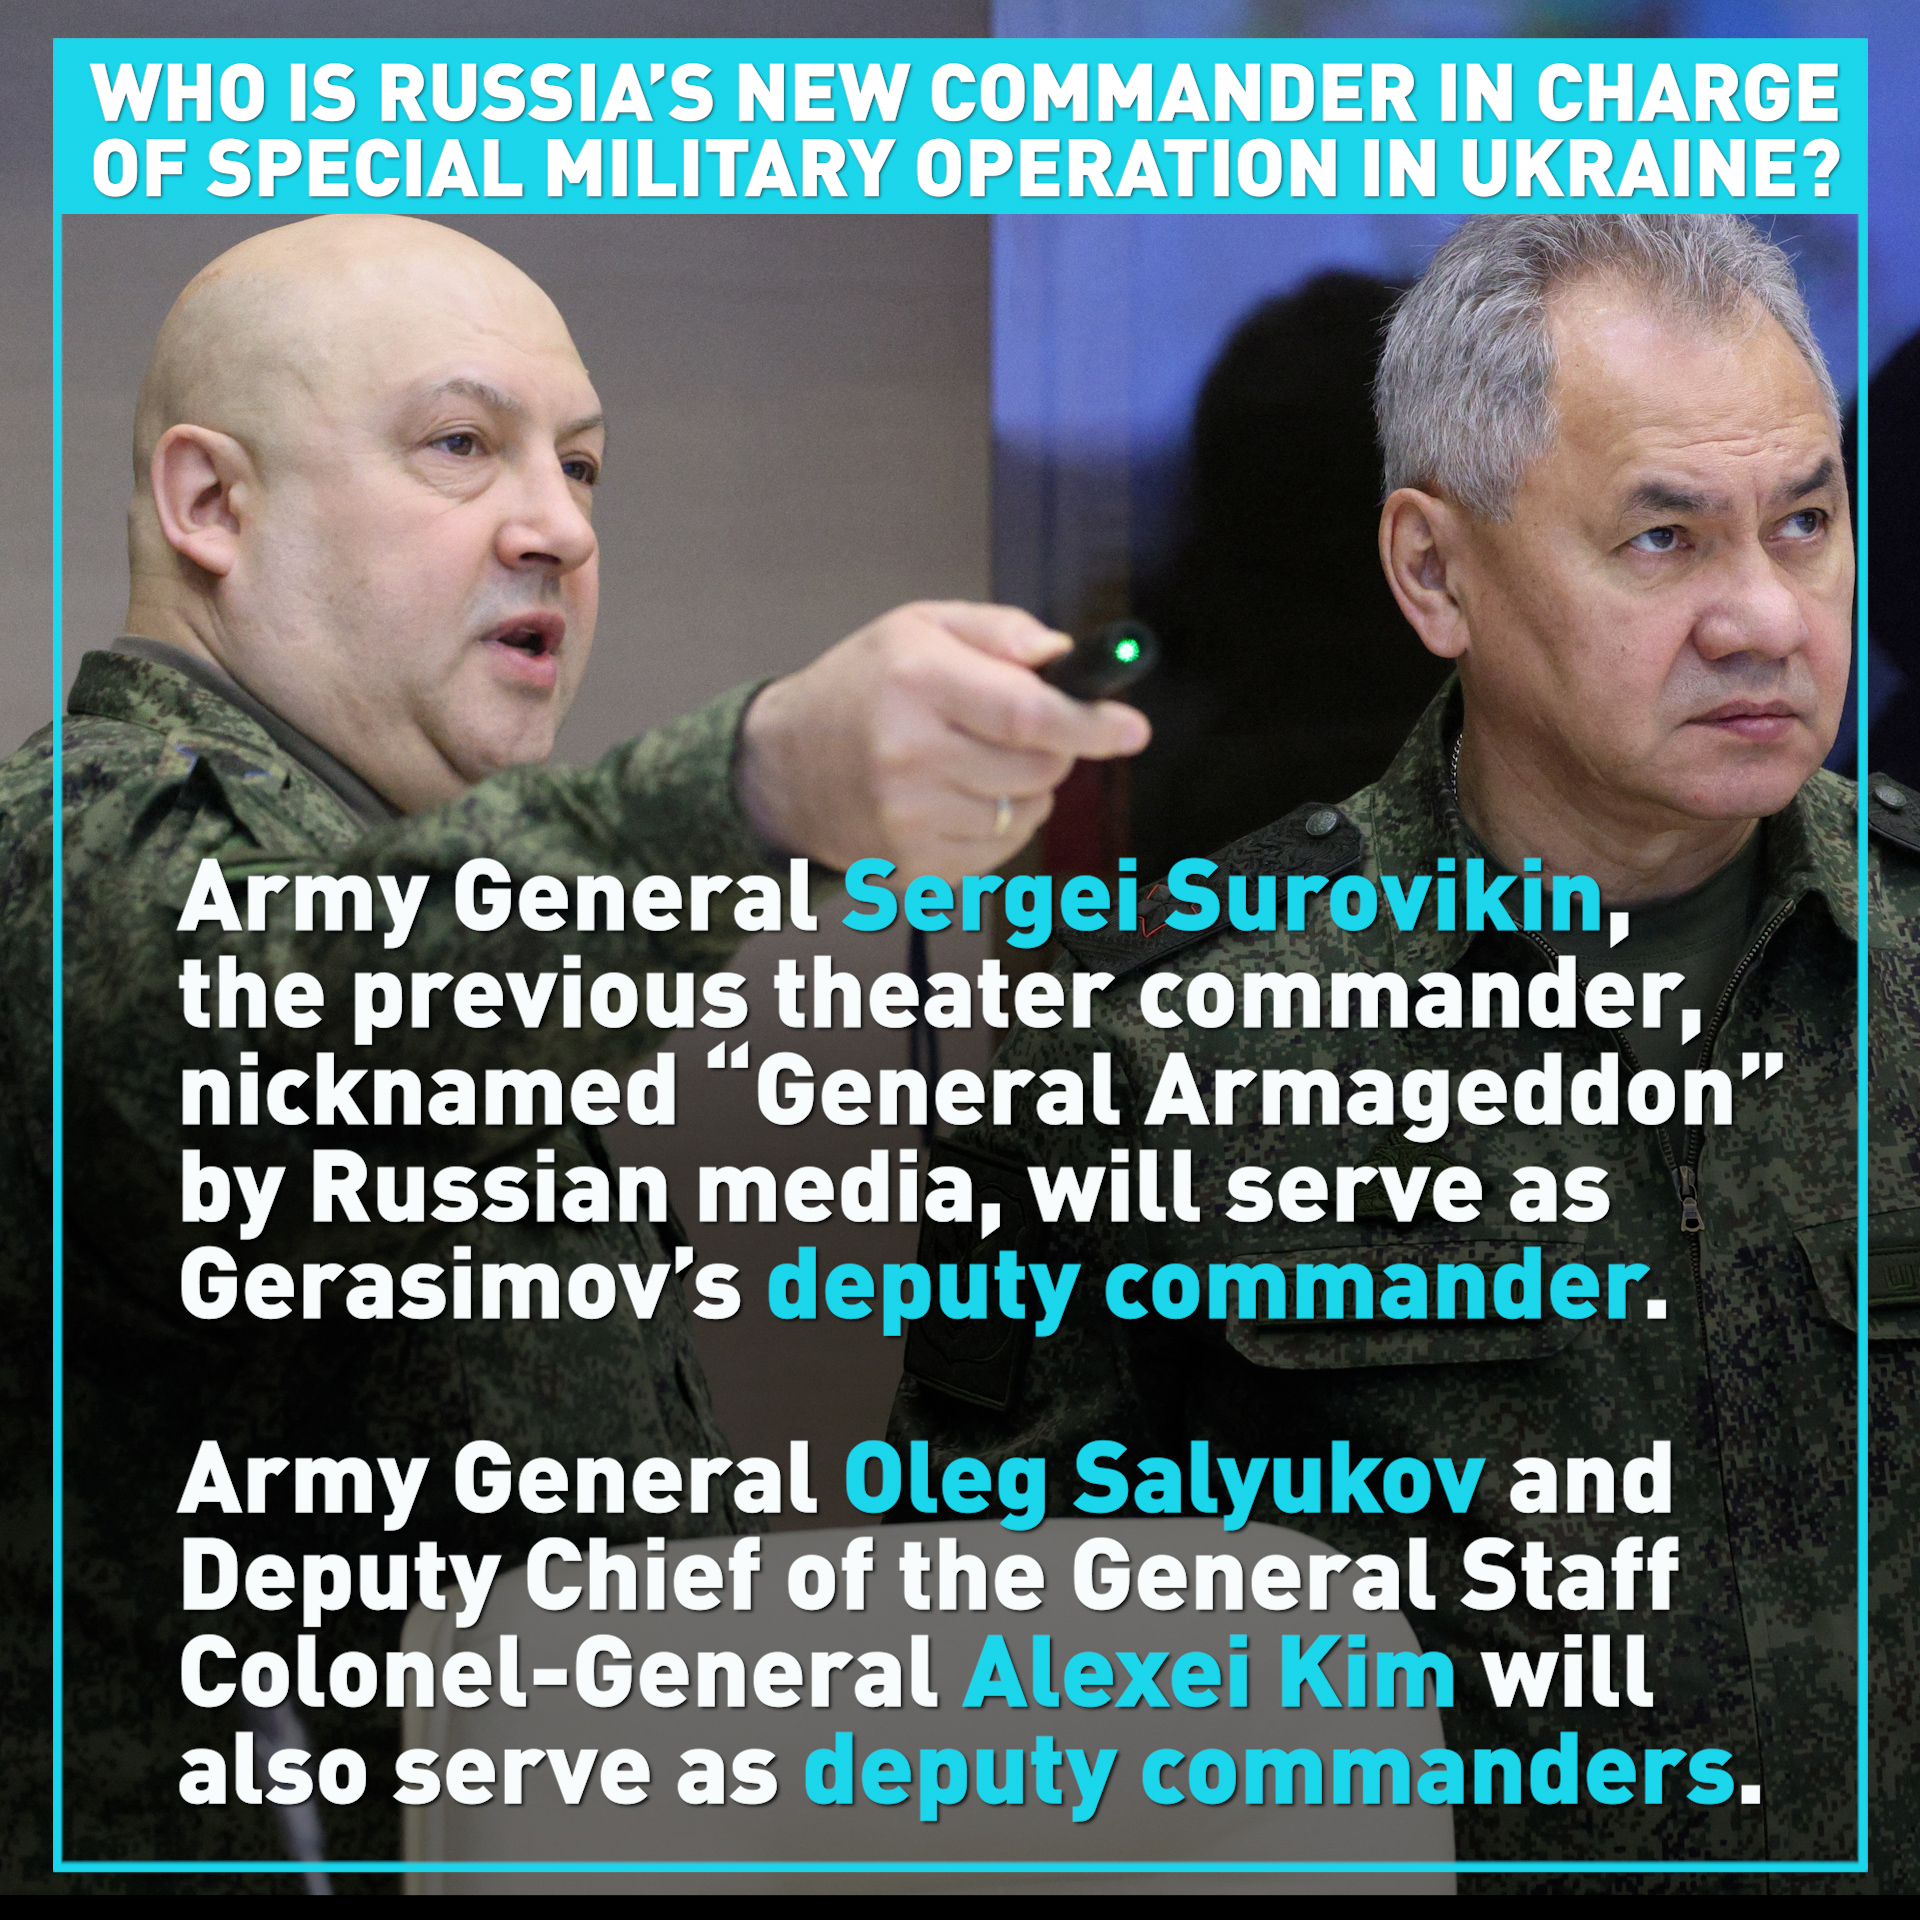 Russia changes leadership in its special military operation in Ukraine